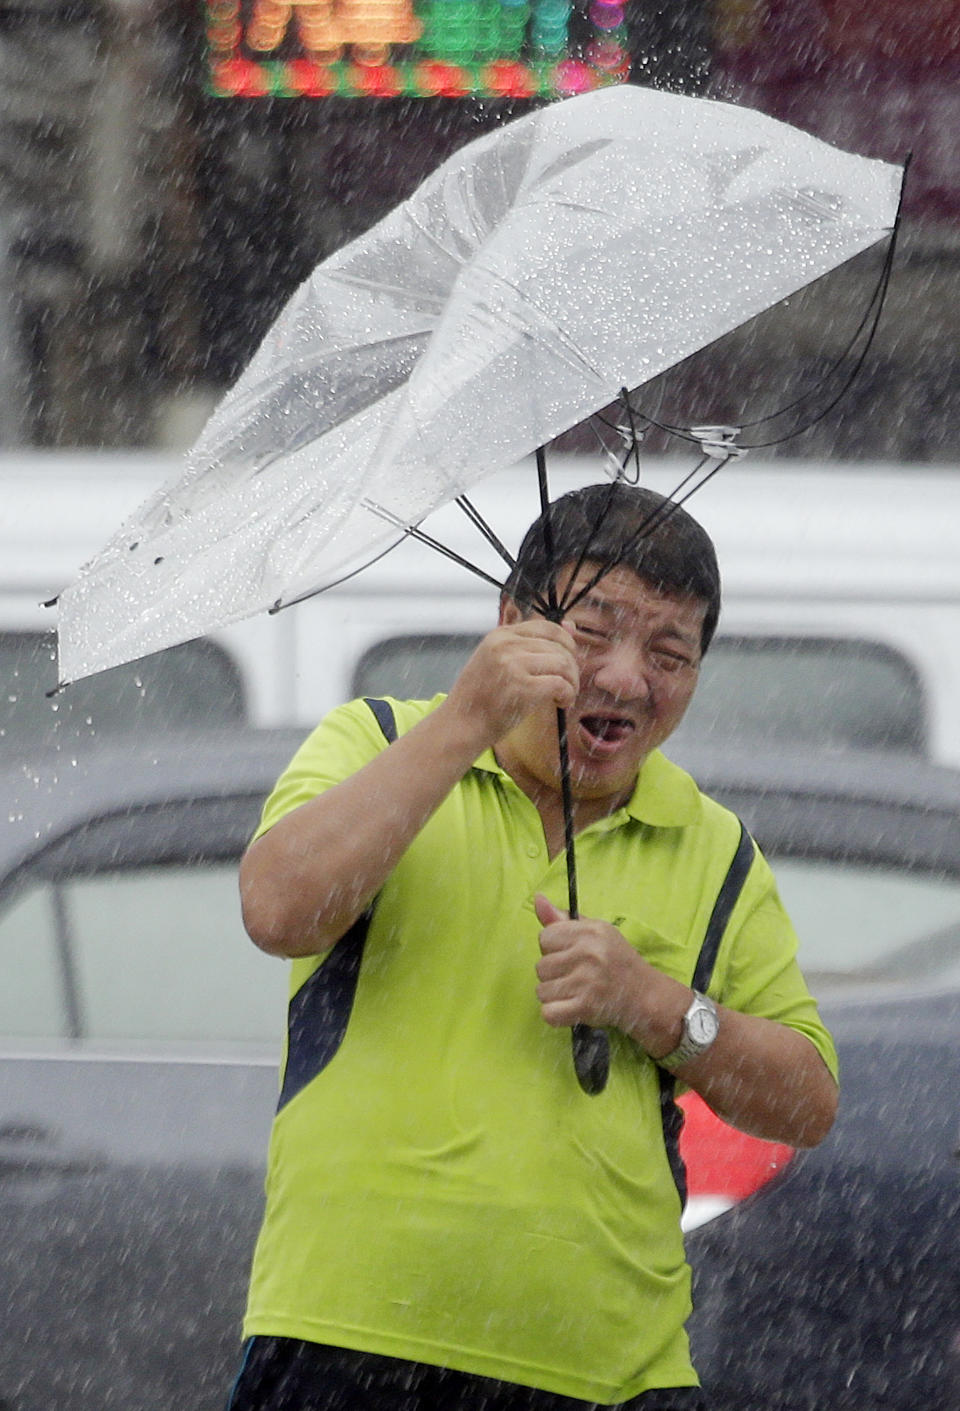 A Taiwanese man holds an umbrella against powerful gusts of wind generated by typhoon Lekima in Taipei, Taiwan, Friday, Aug. 9, 2019. (AP Photo/Chiang Ying-ying)